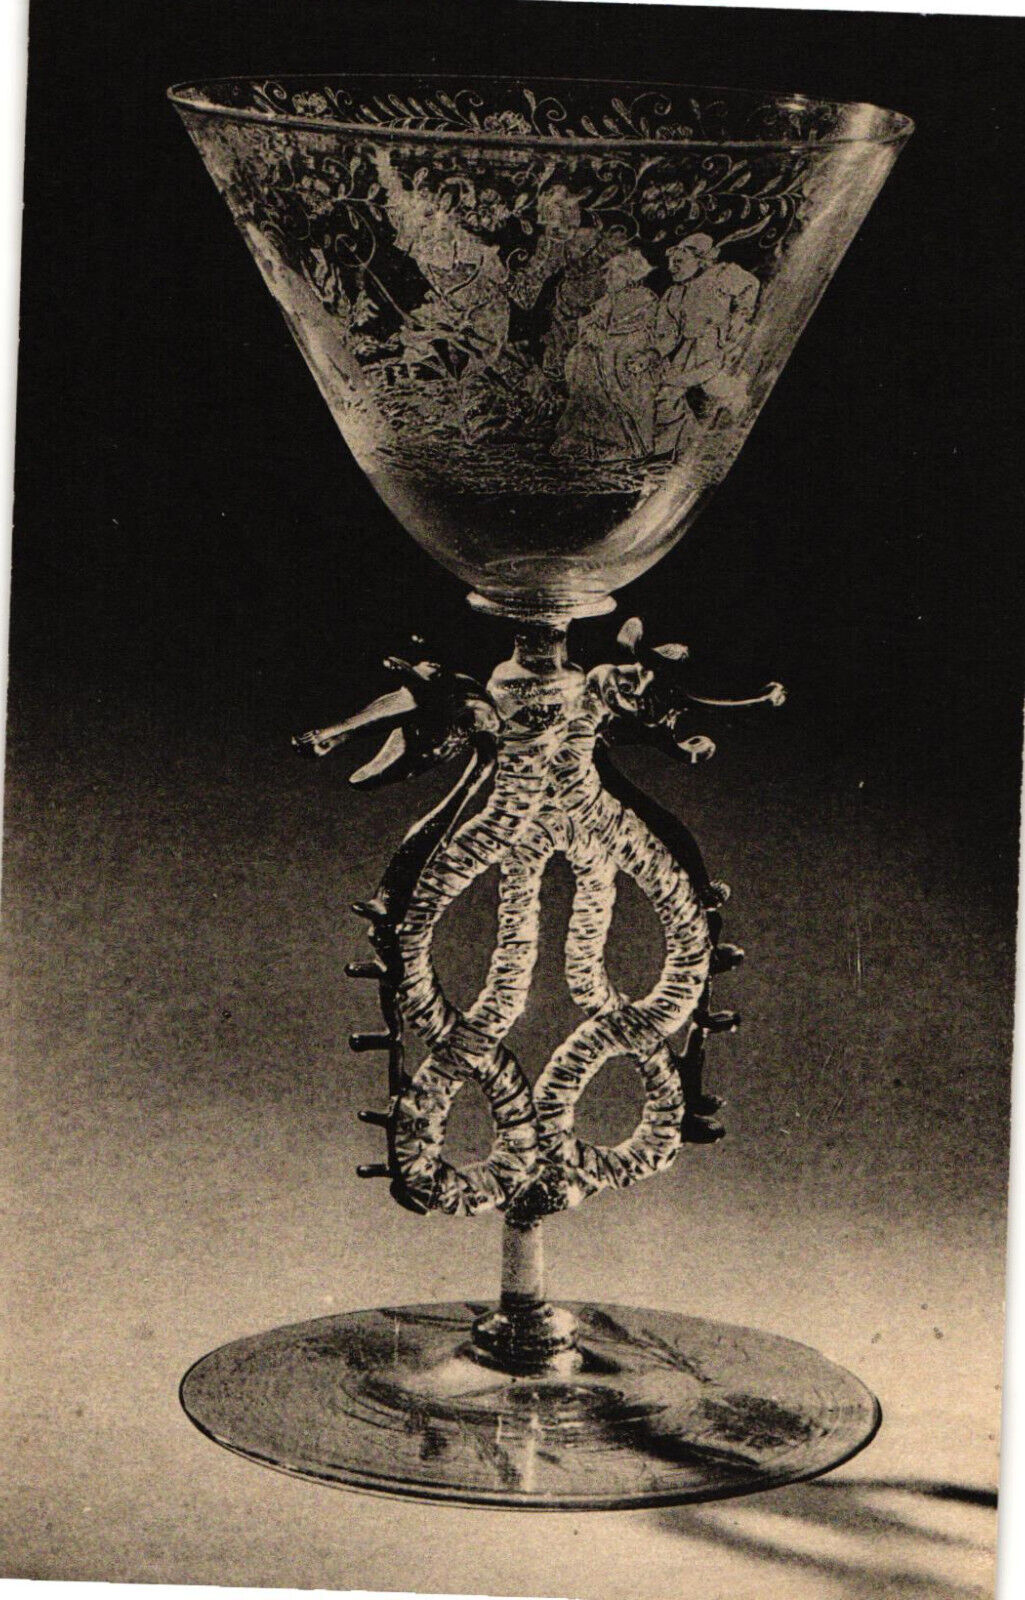 Vintage Unposted Postcard WINGED WINE GLASS LATE 17TH CENTURY CORNING GLASS NY